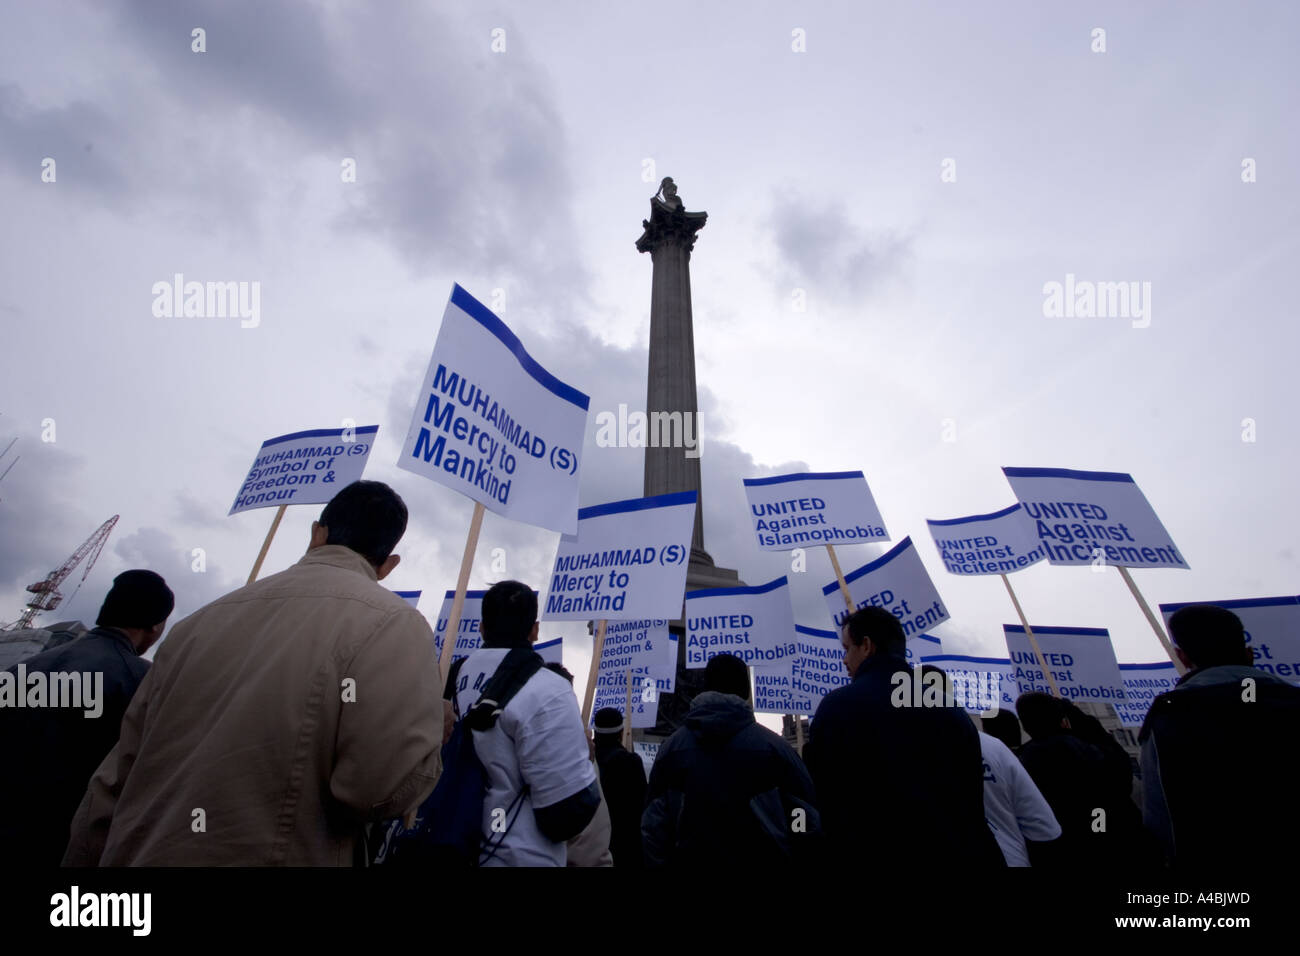 islamic protesters meeting in Trafalgar square demonstrating about islamophobia after publication of cartoon in Danish paper Stock Photo